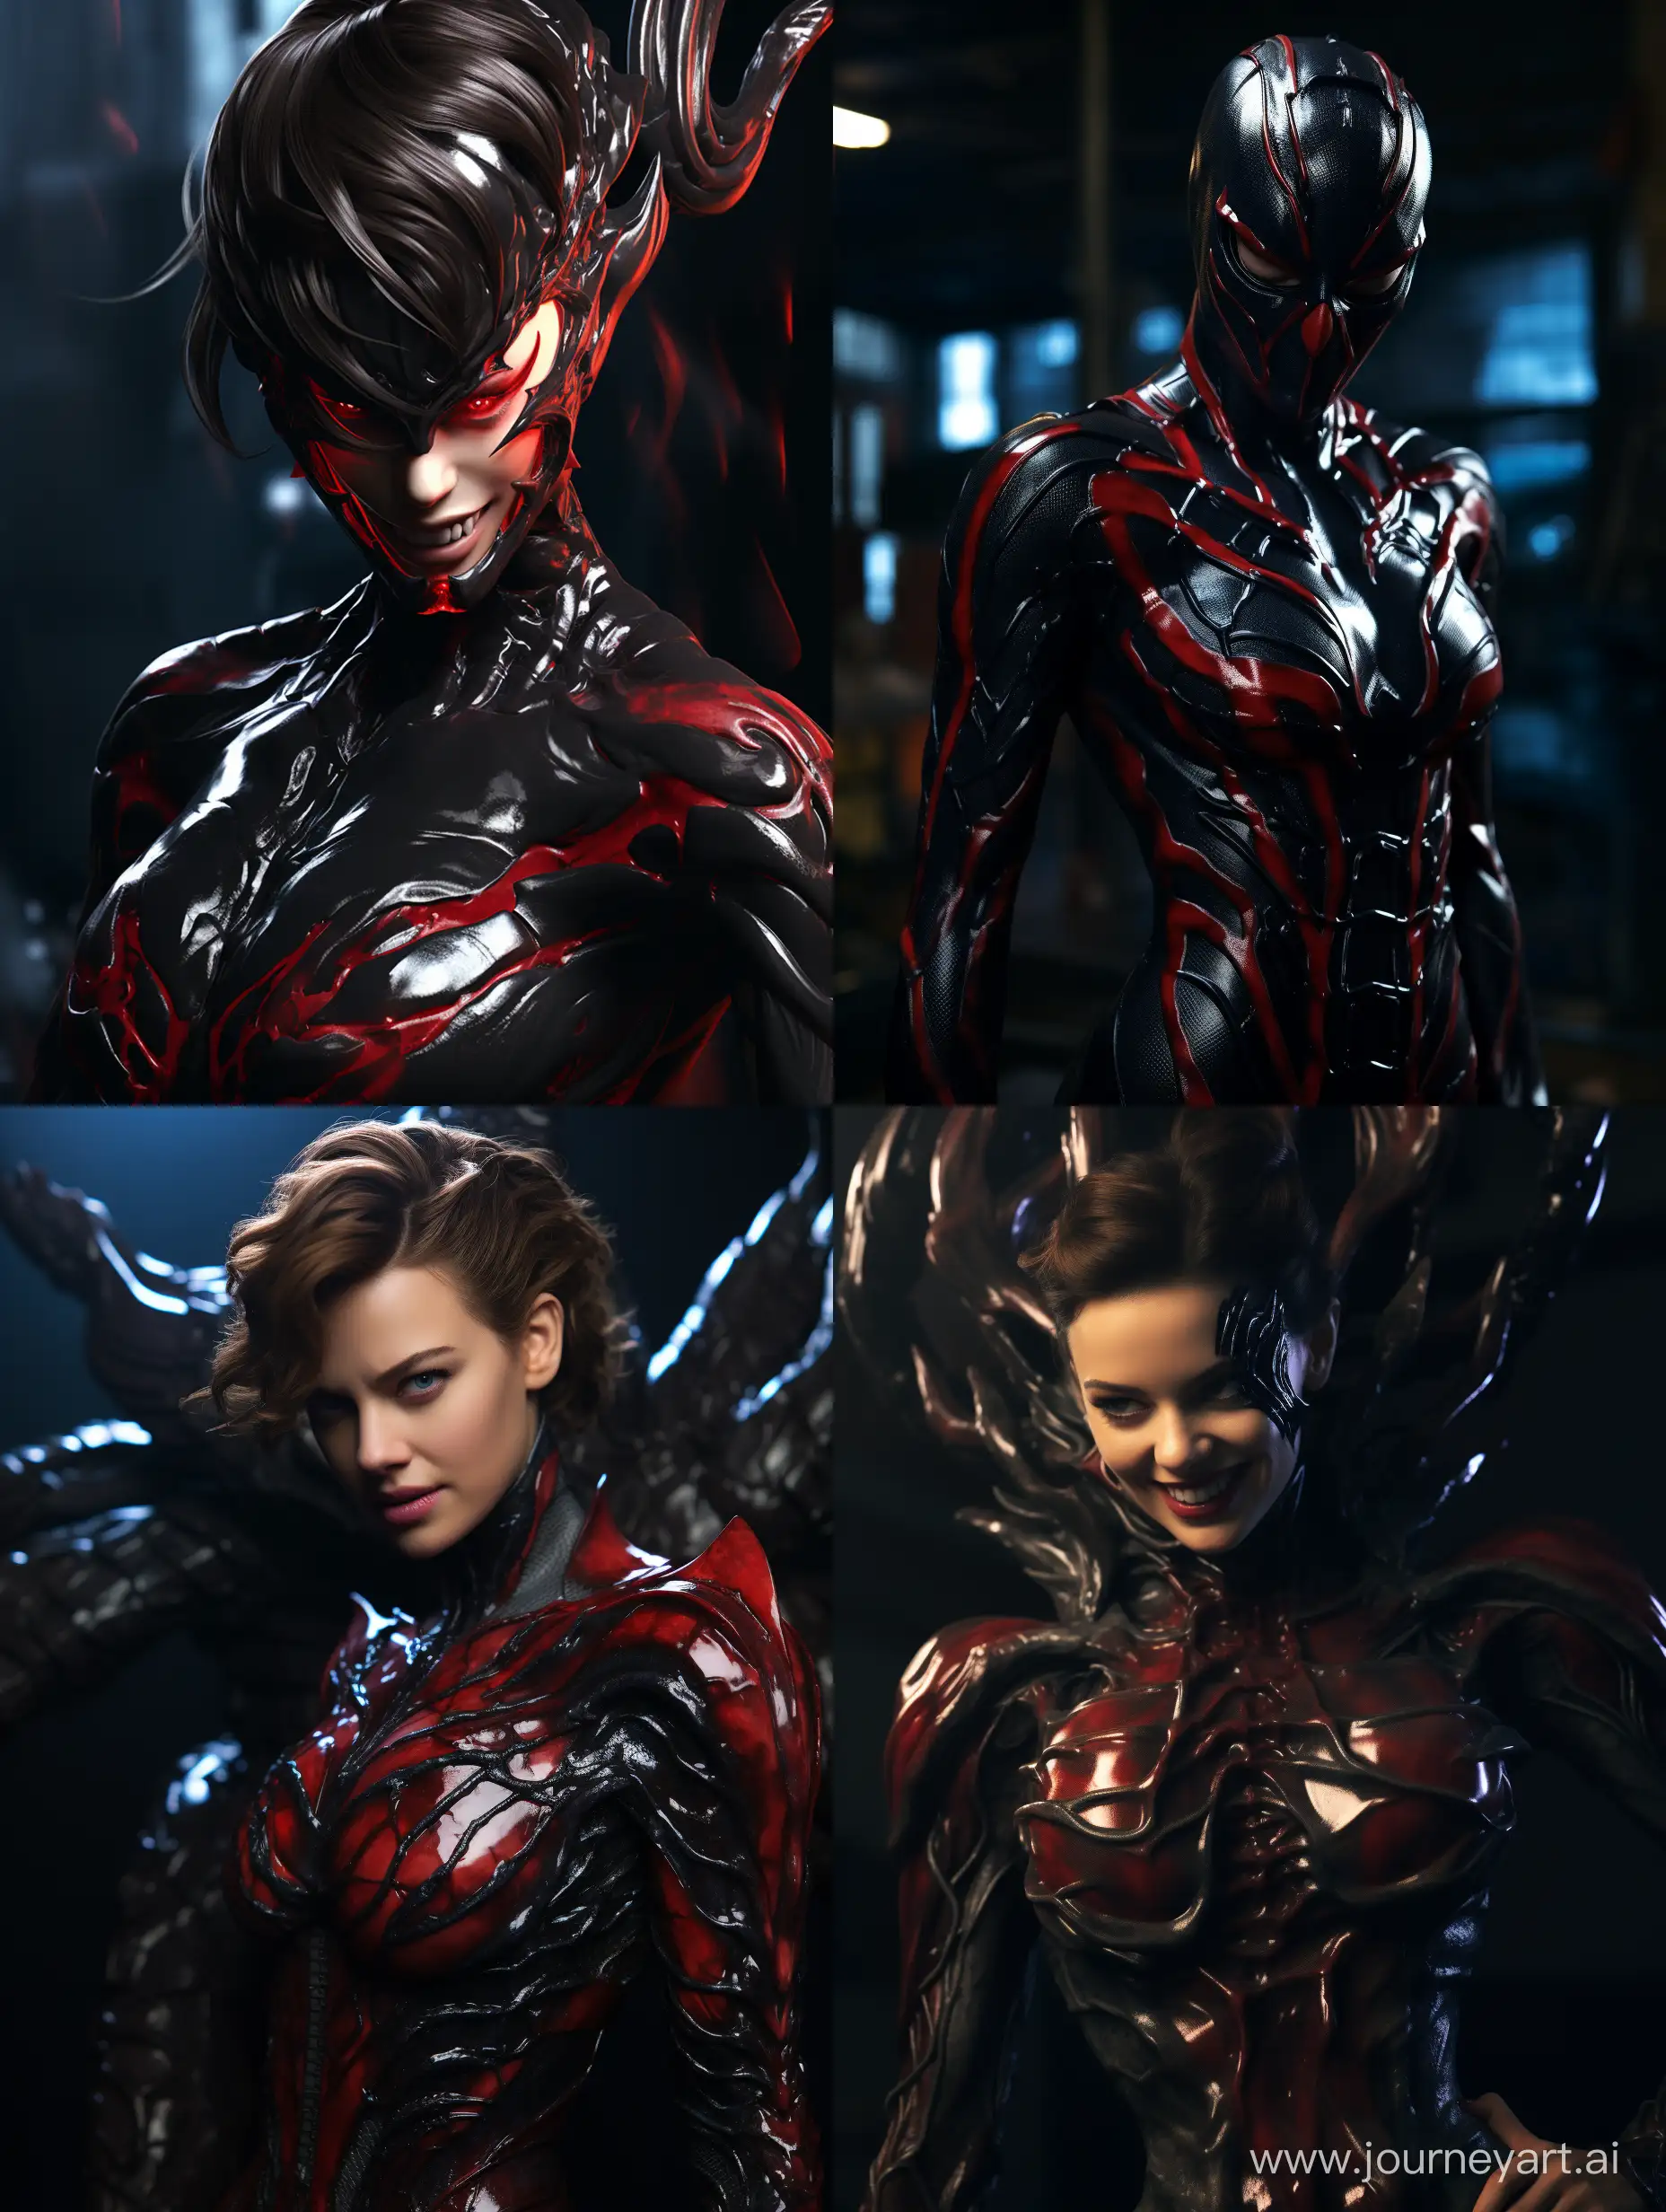 Mila-Jovich-Embraces-Venom-and-Carnage-in-Hyperrealistic-RTX-Art